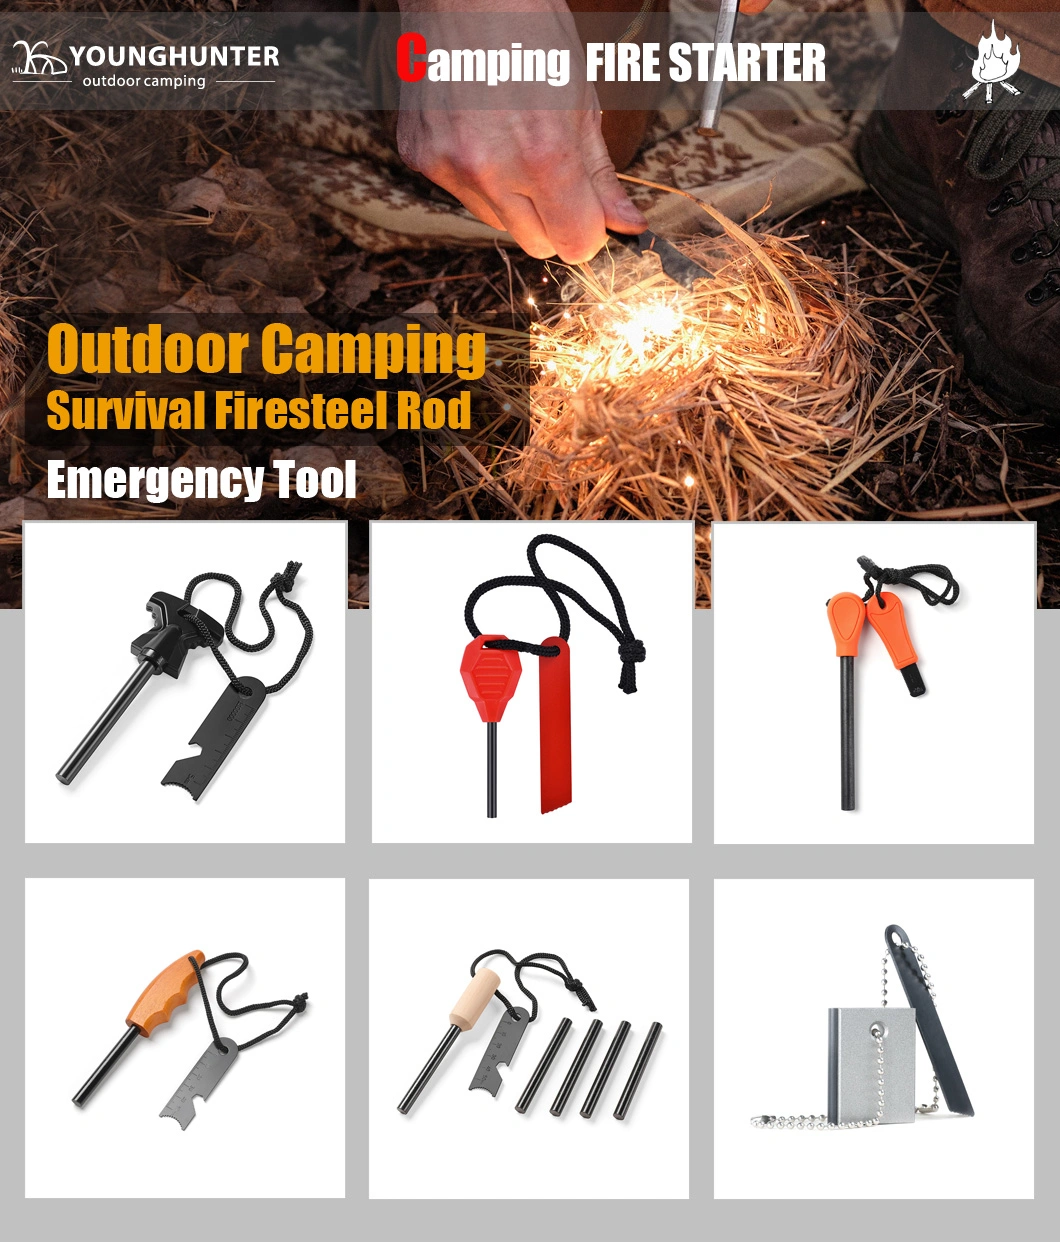 8*80mm Emergency Survival Gear Magnesium Fire Starter with Handcrafted Wood Handle